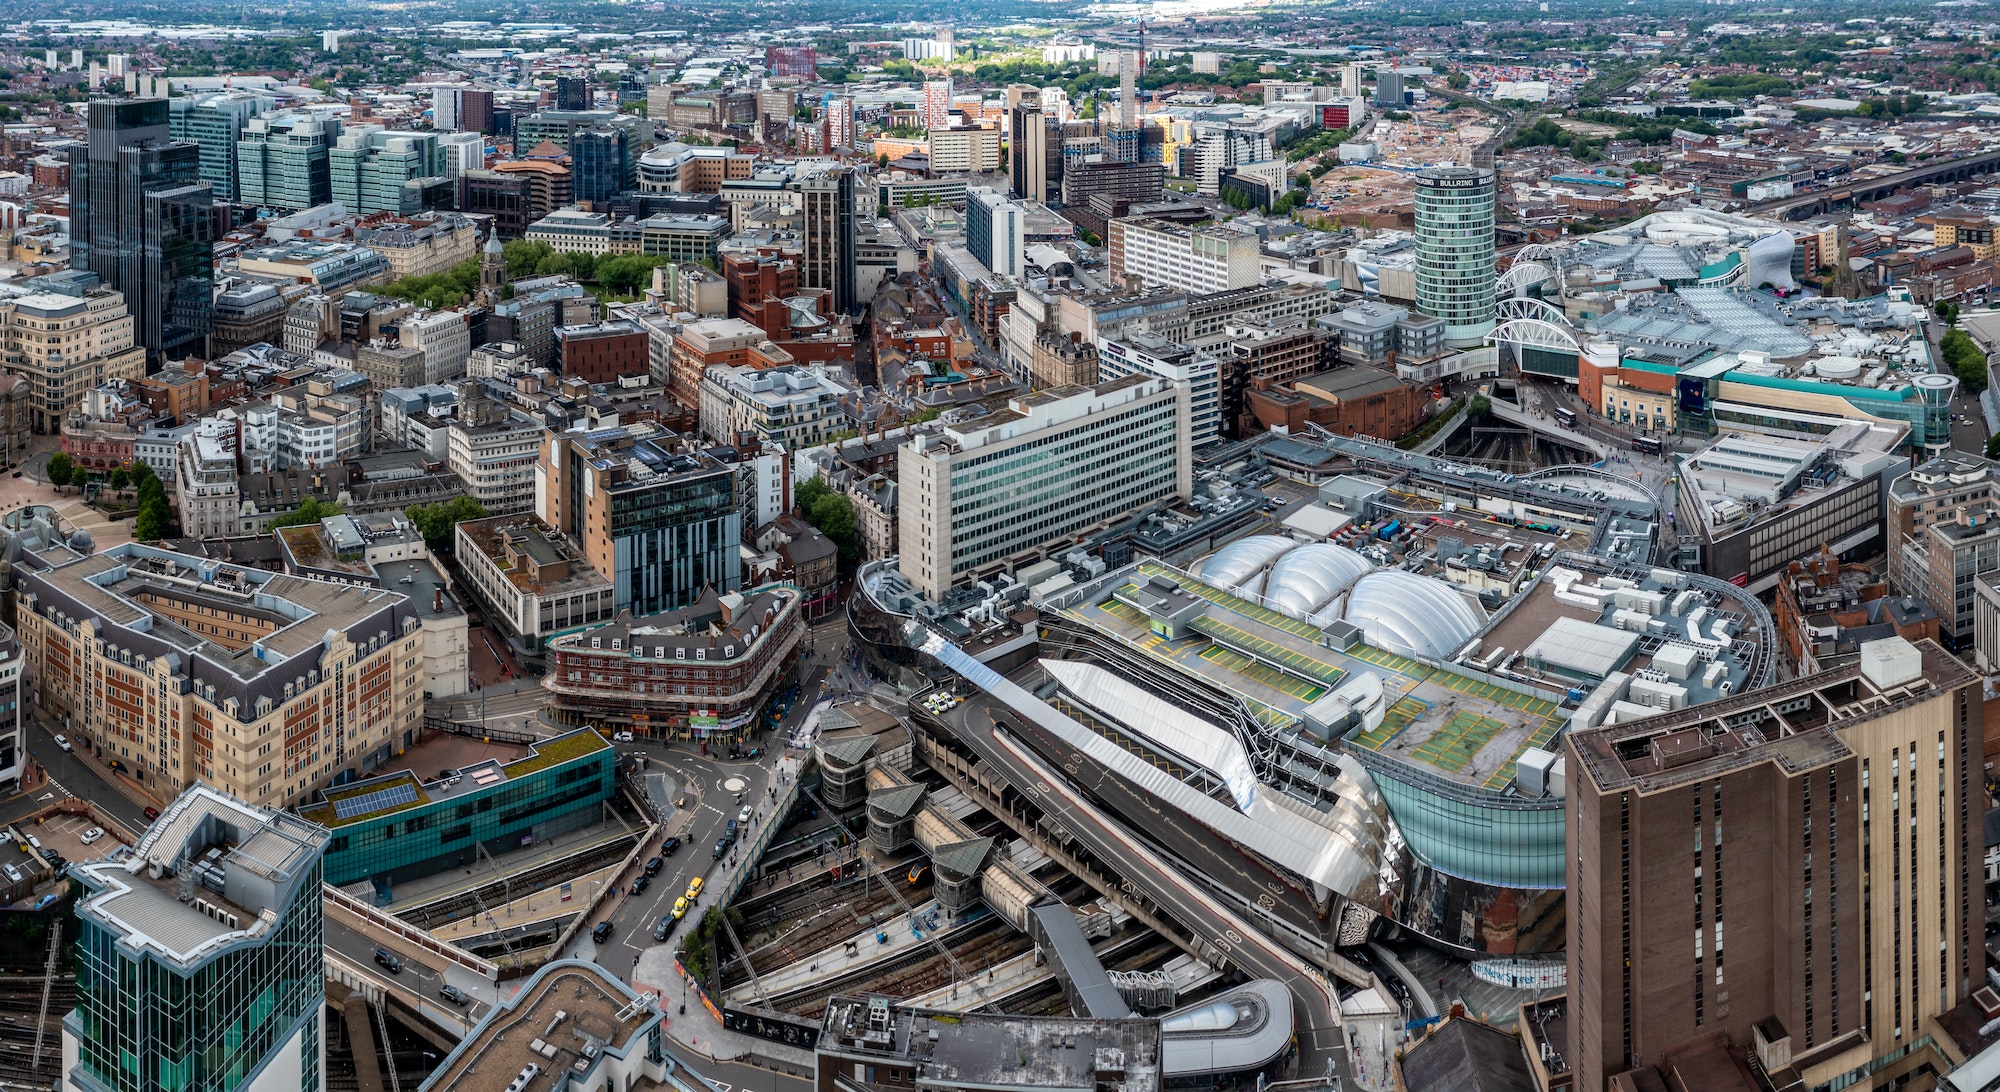 Aerial view of the buildings and architecture of a Birmingham city centre cityscape skyline